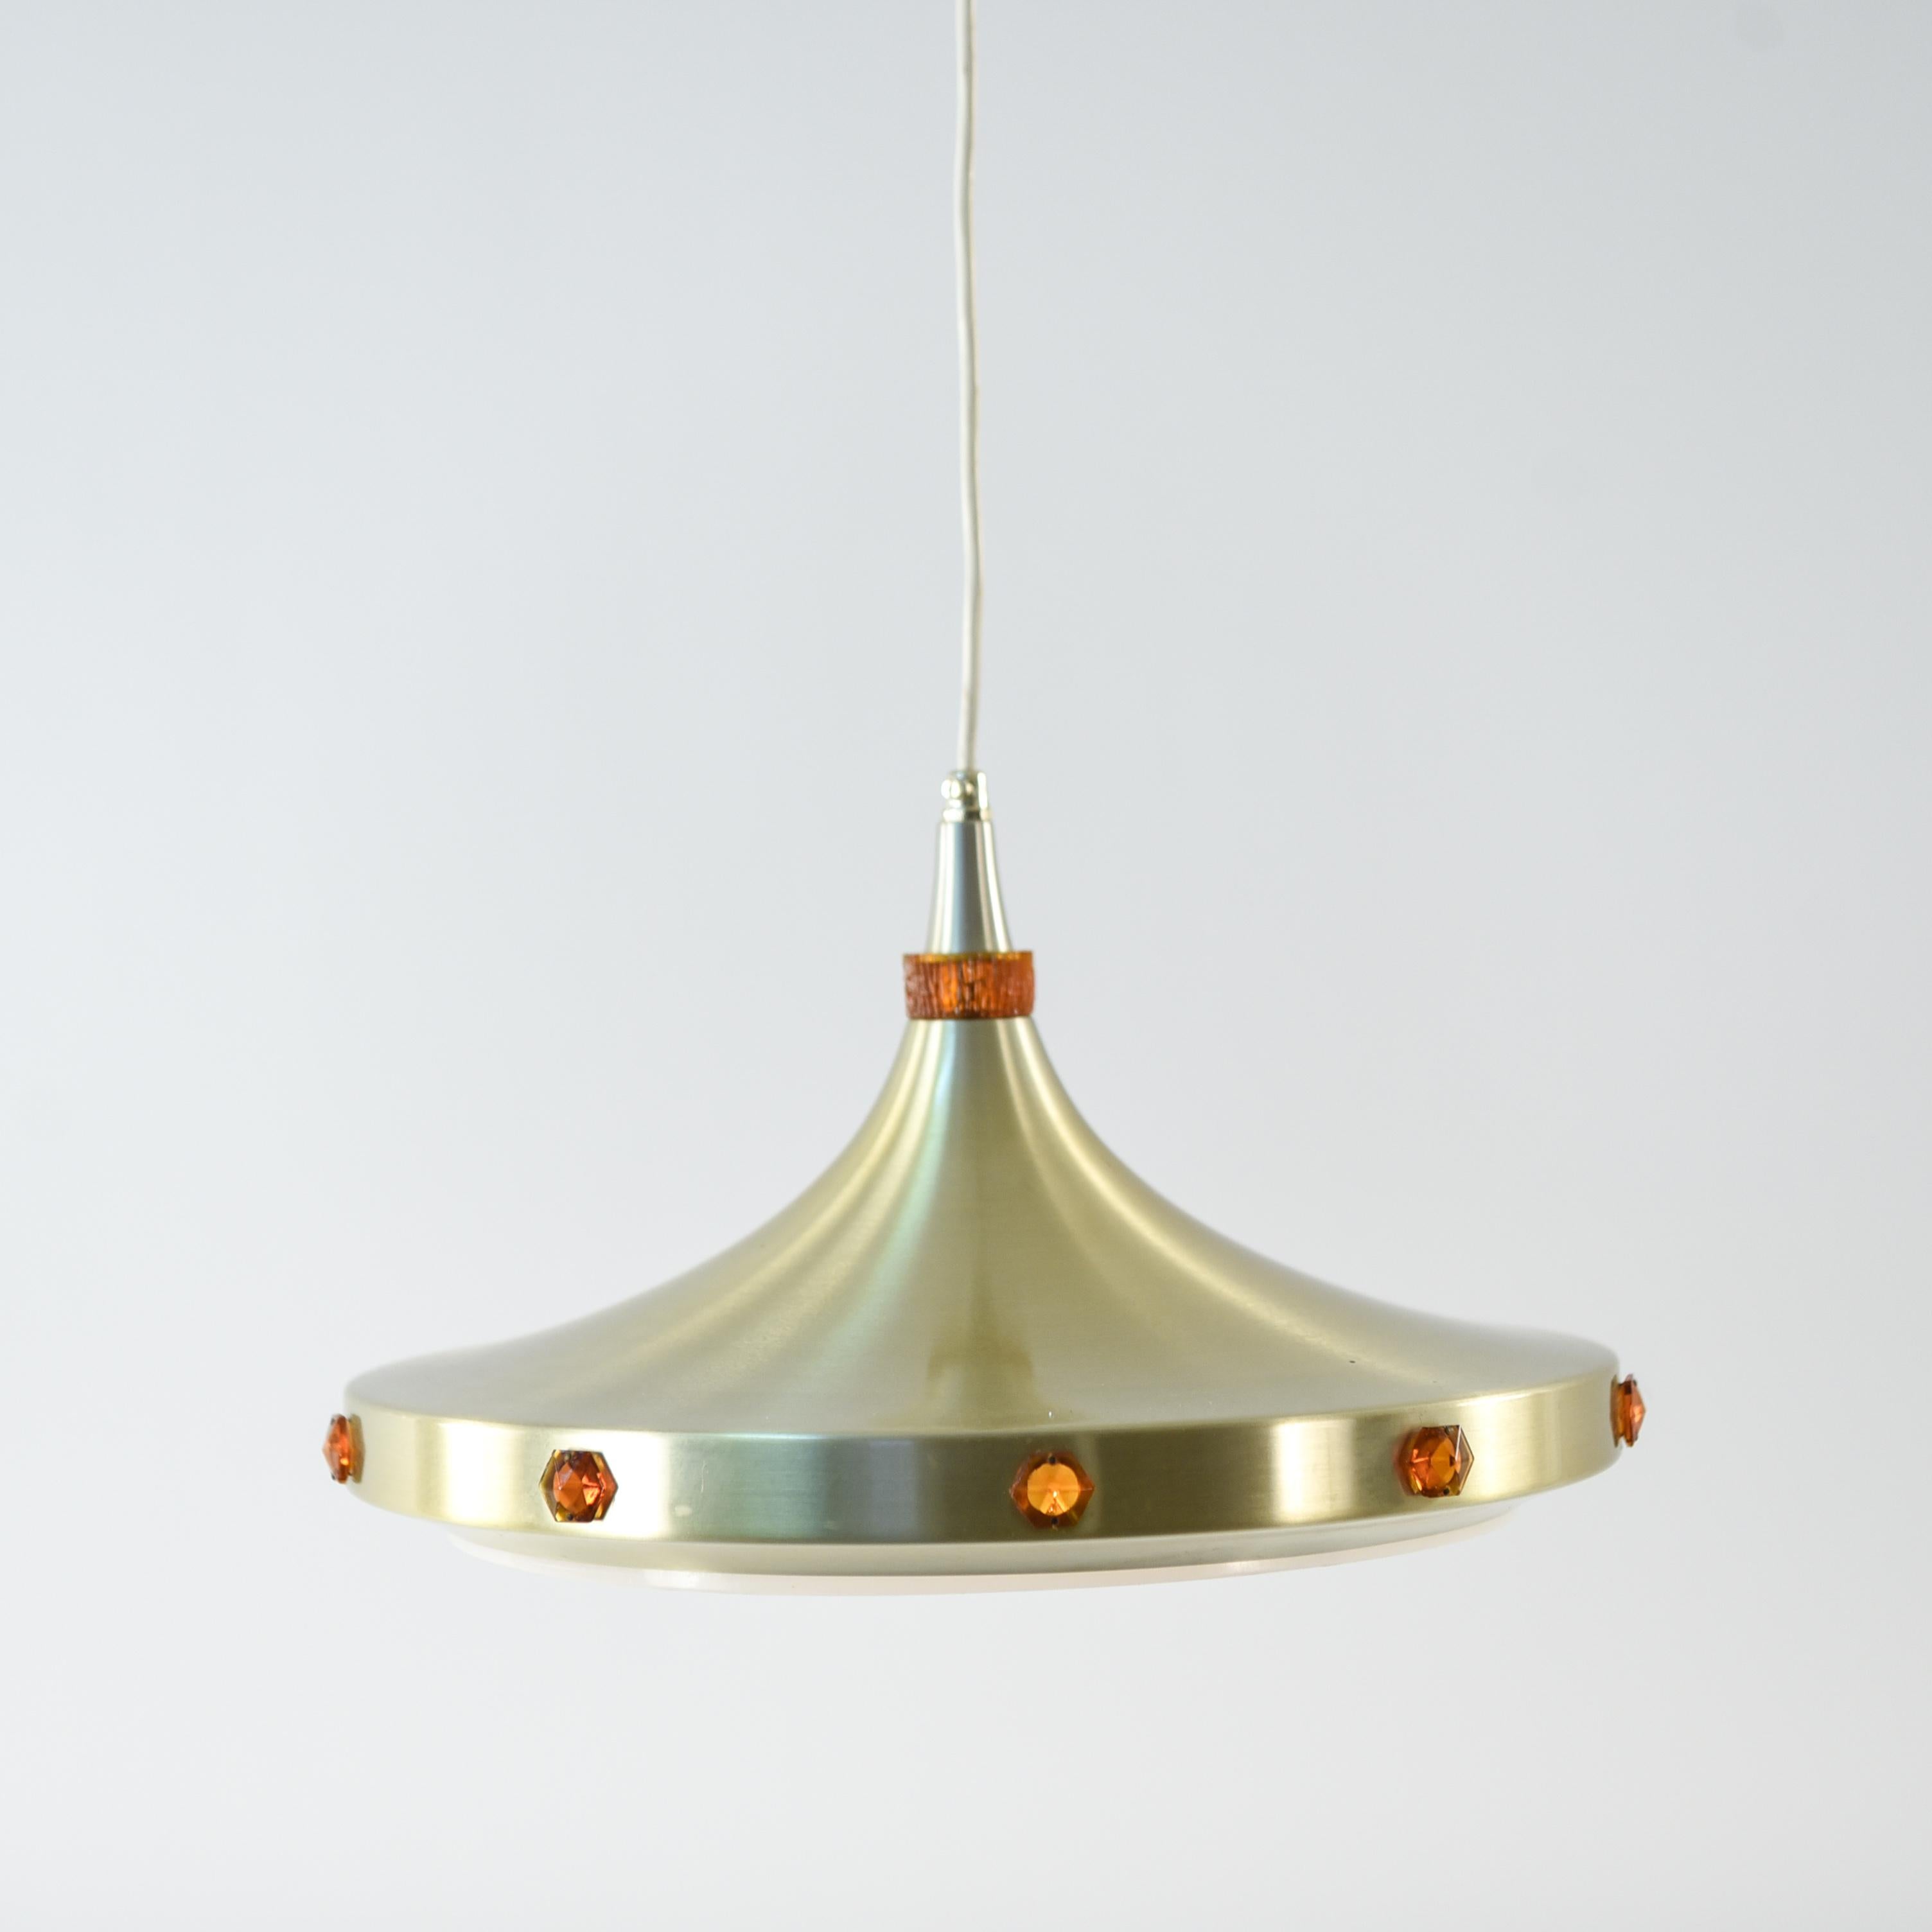 This Danish midcentury pendant light by Vitrika features a brass outer ring adorned with orange colored glass jewels. On the interior are white concentric circles which not only function to reflect more light, but also add an element of stylistic